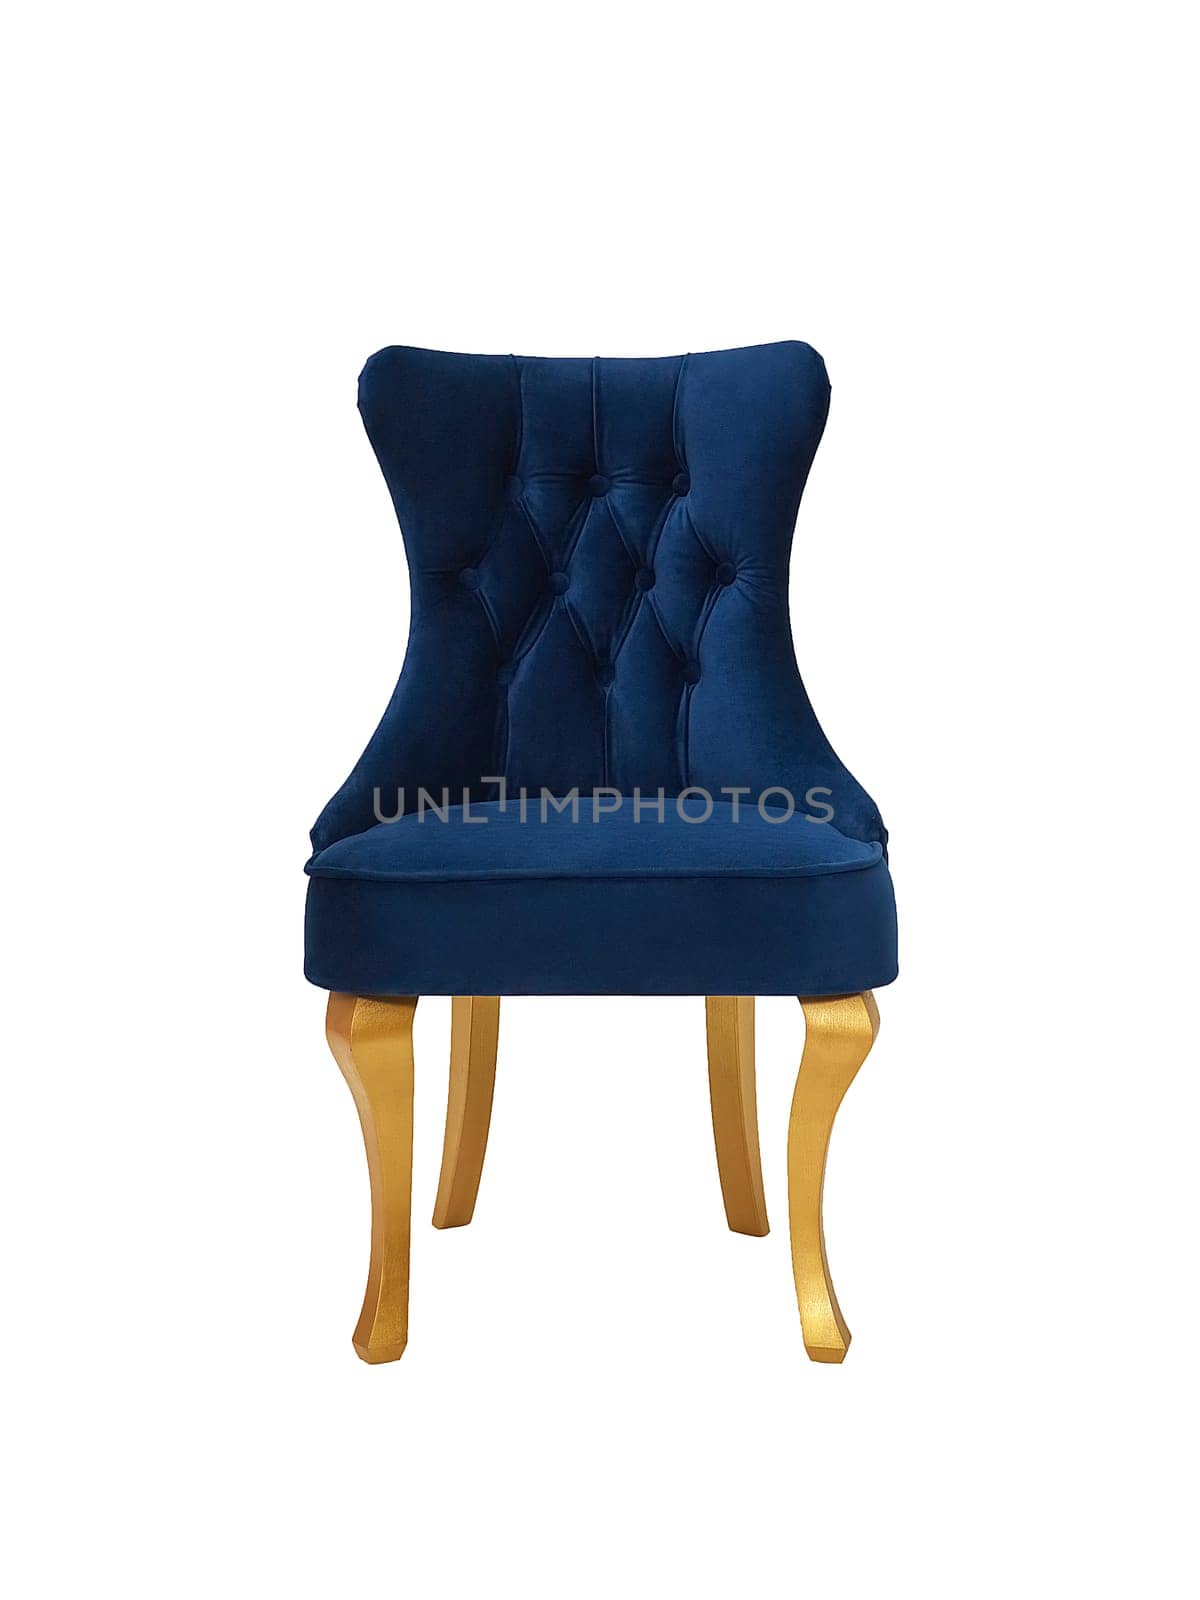 blue fabric chair in vintage style with yellow legs isolated on white background, front view. retro furniture in classical style, interior, home design